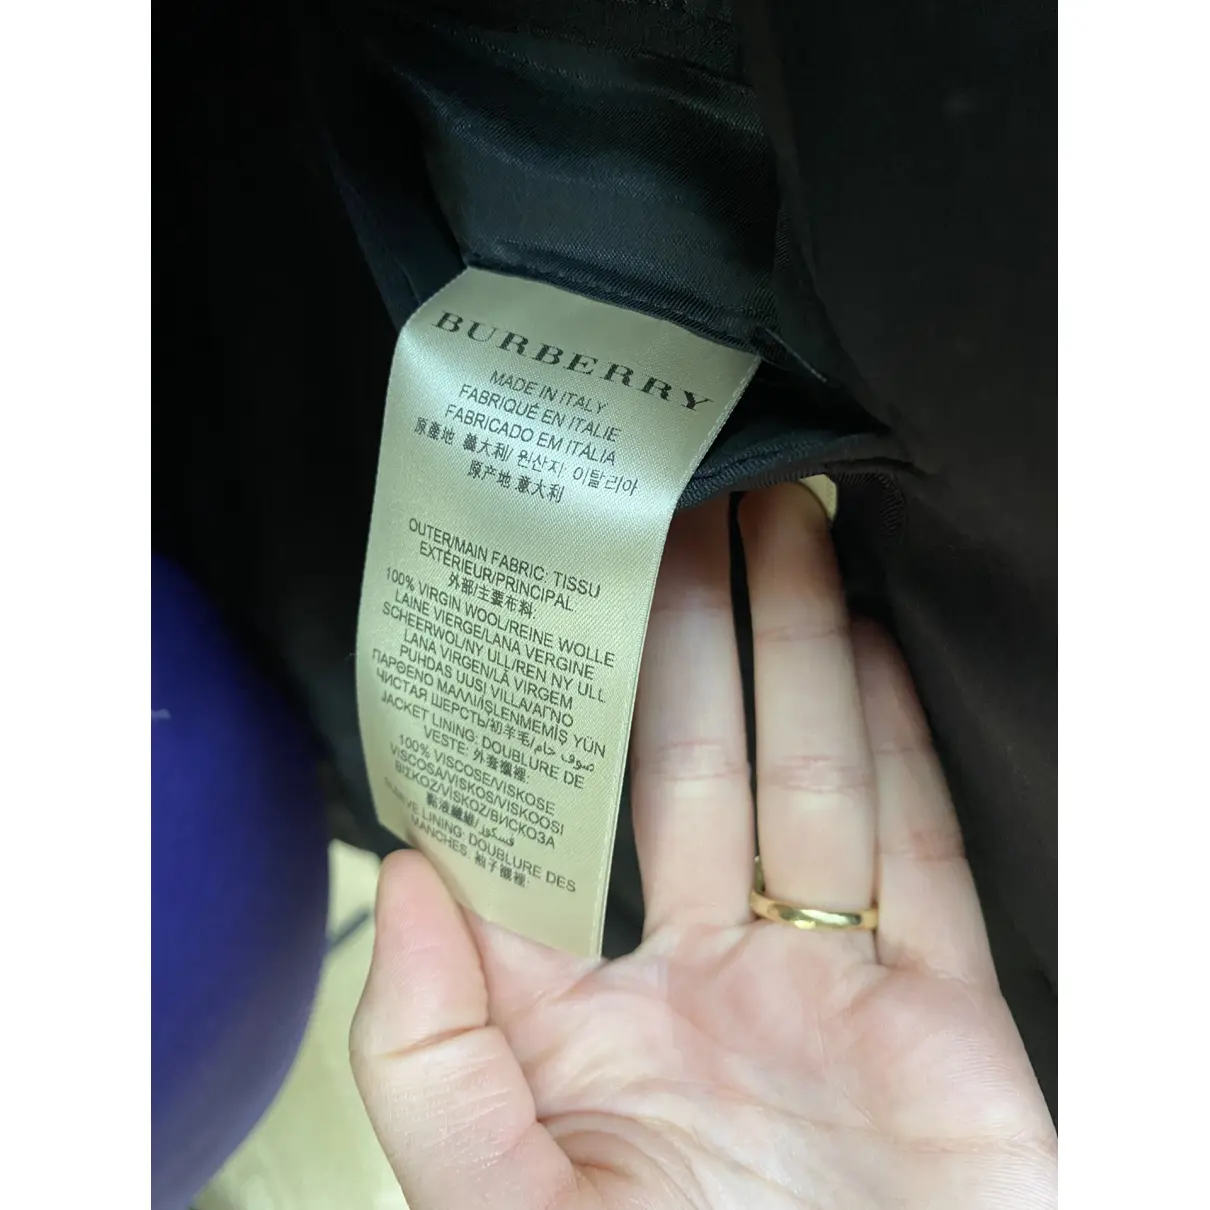 Wool suit Burberry